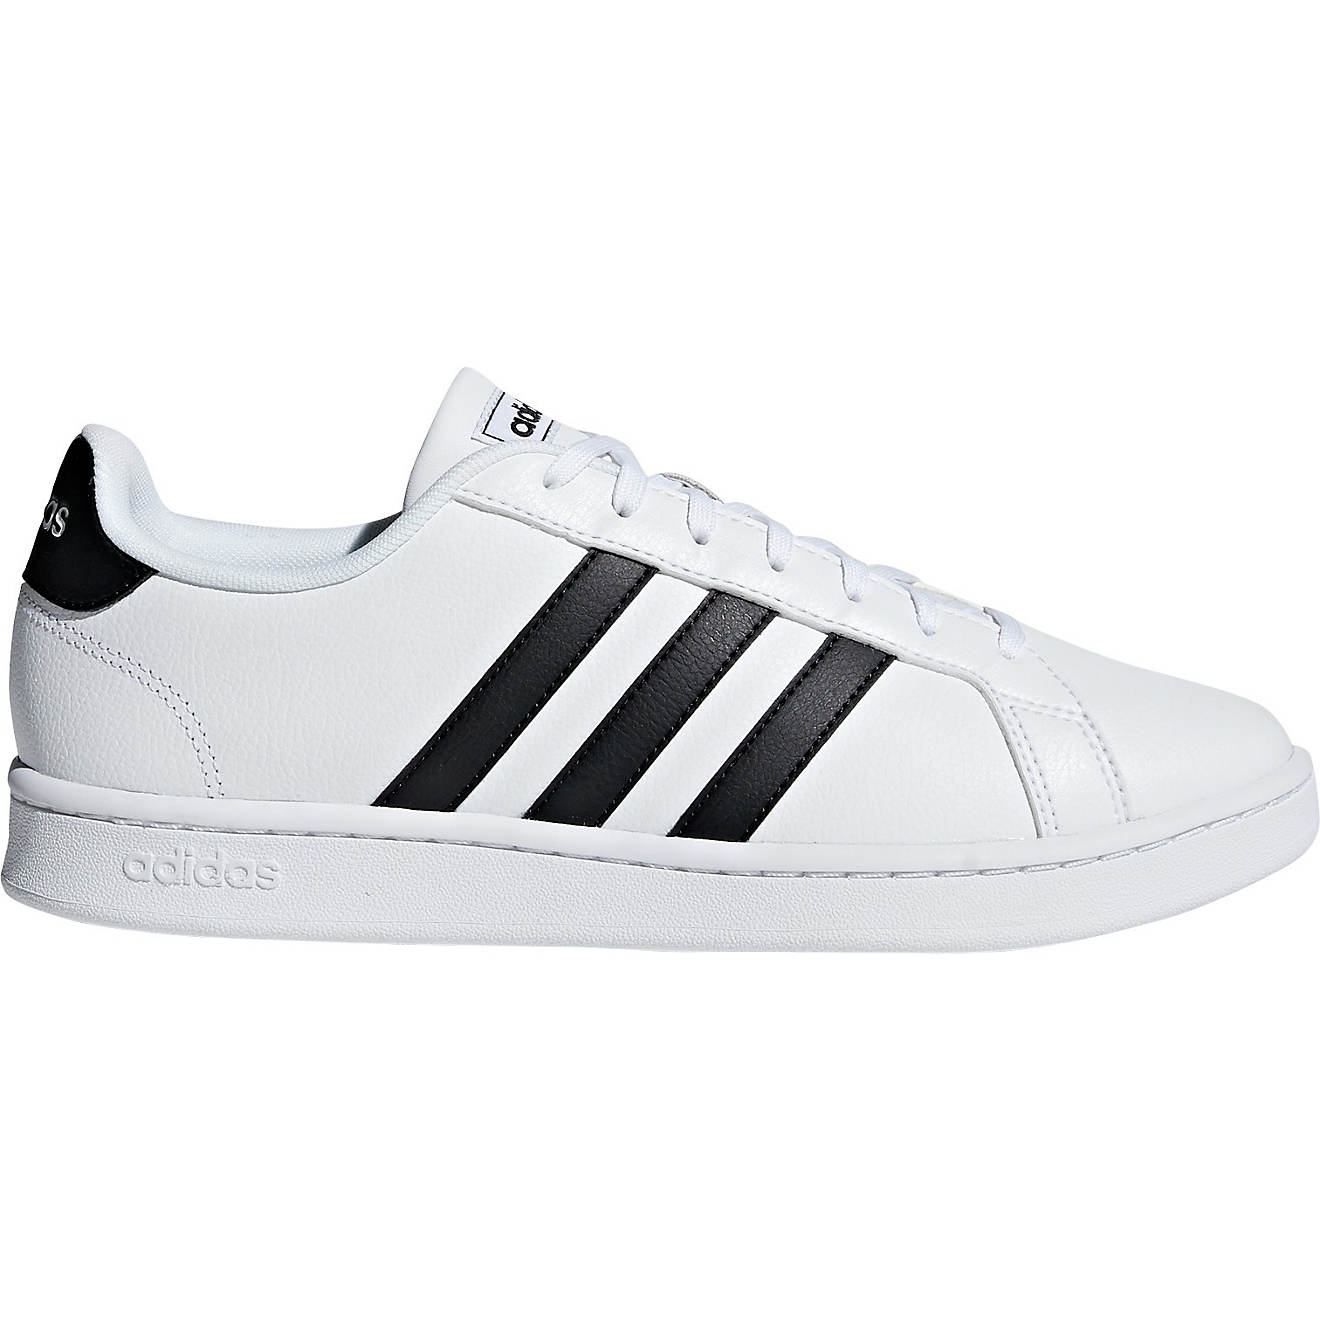 adidas Men's Grand Court Shoes | Free Shipping at Academy